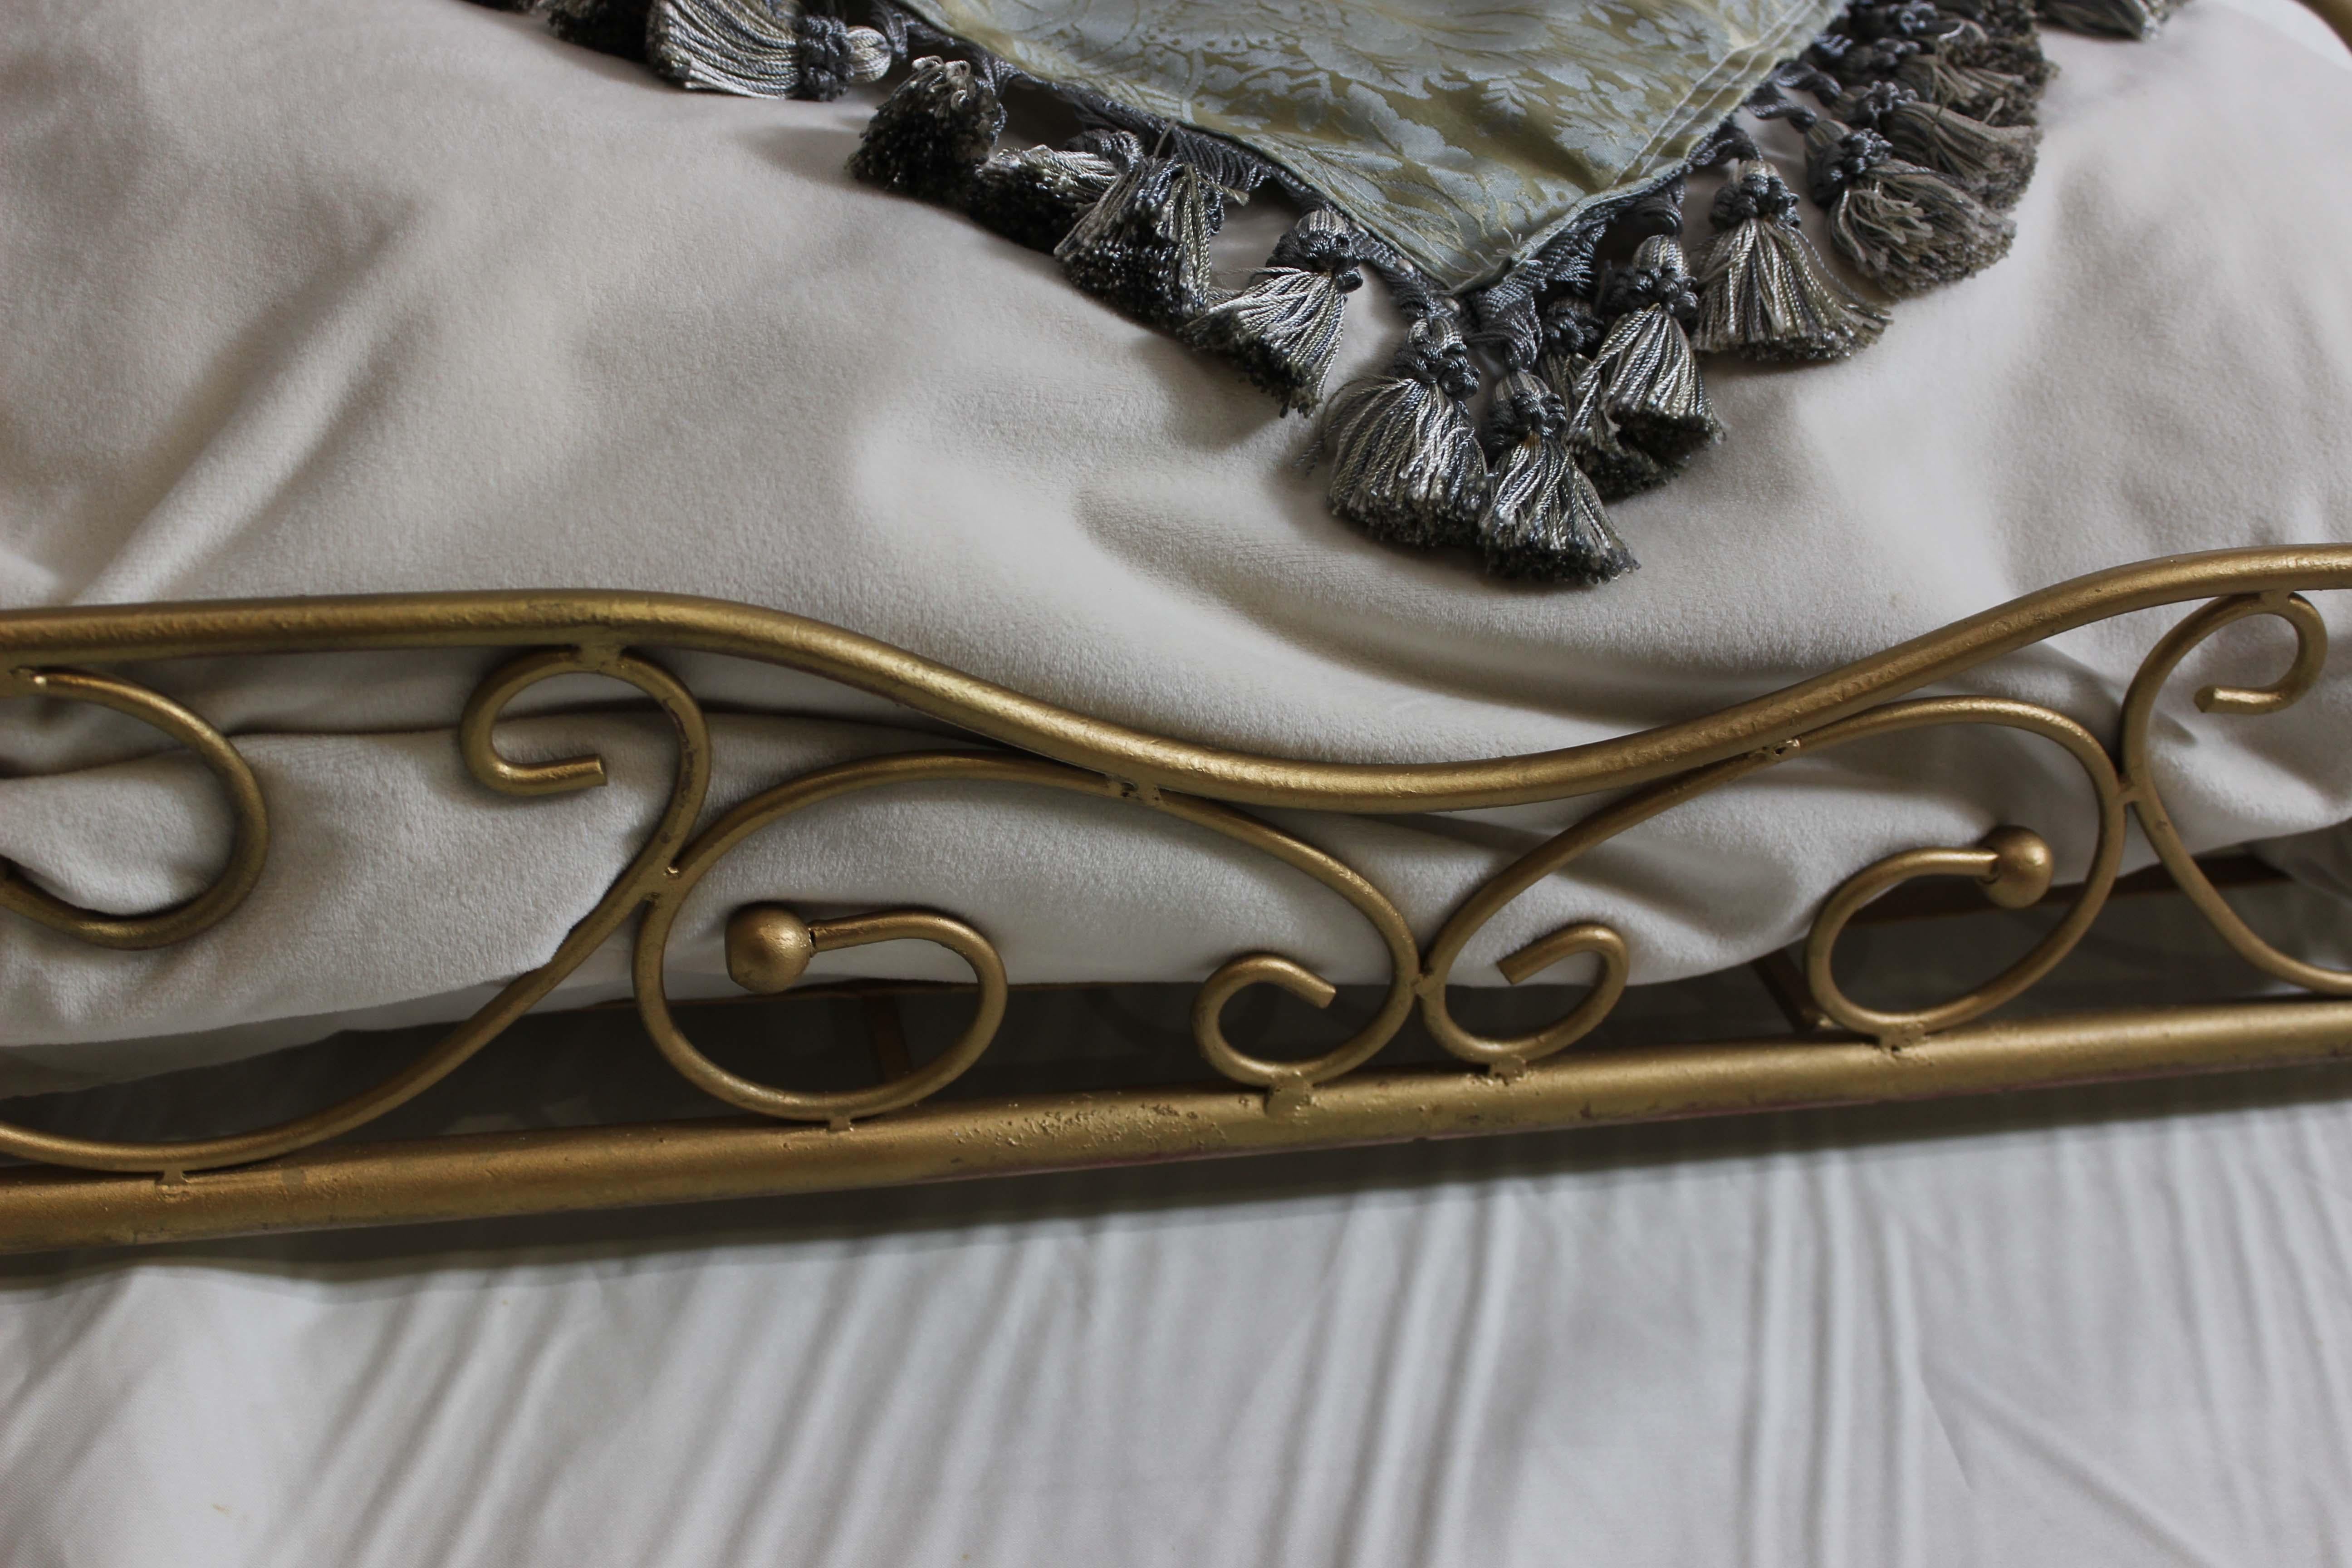 Dog bed, gilt wrought iron, including pillow in envelope shape, with tassels.